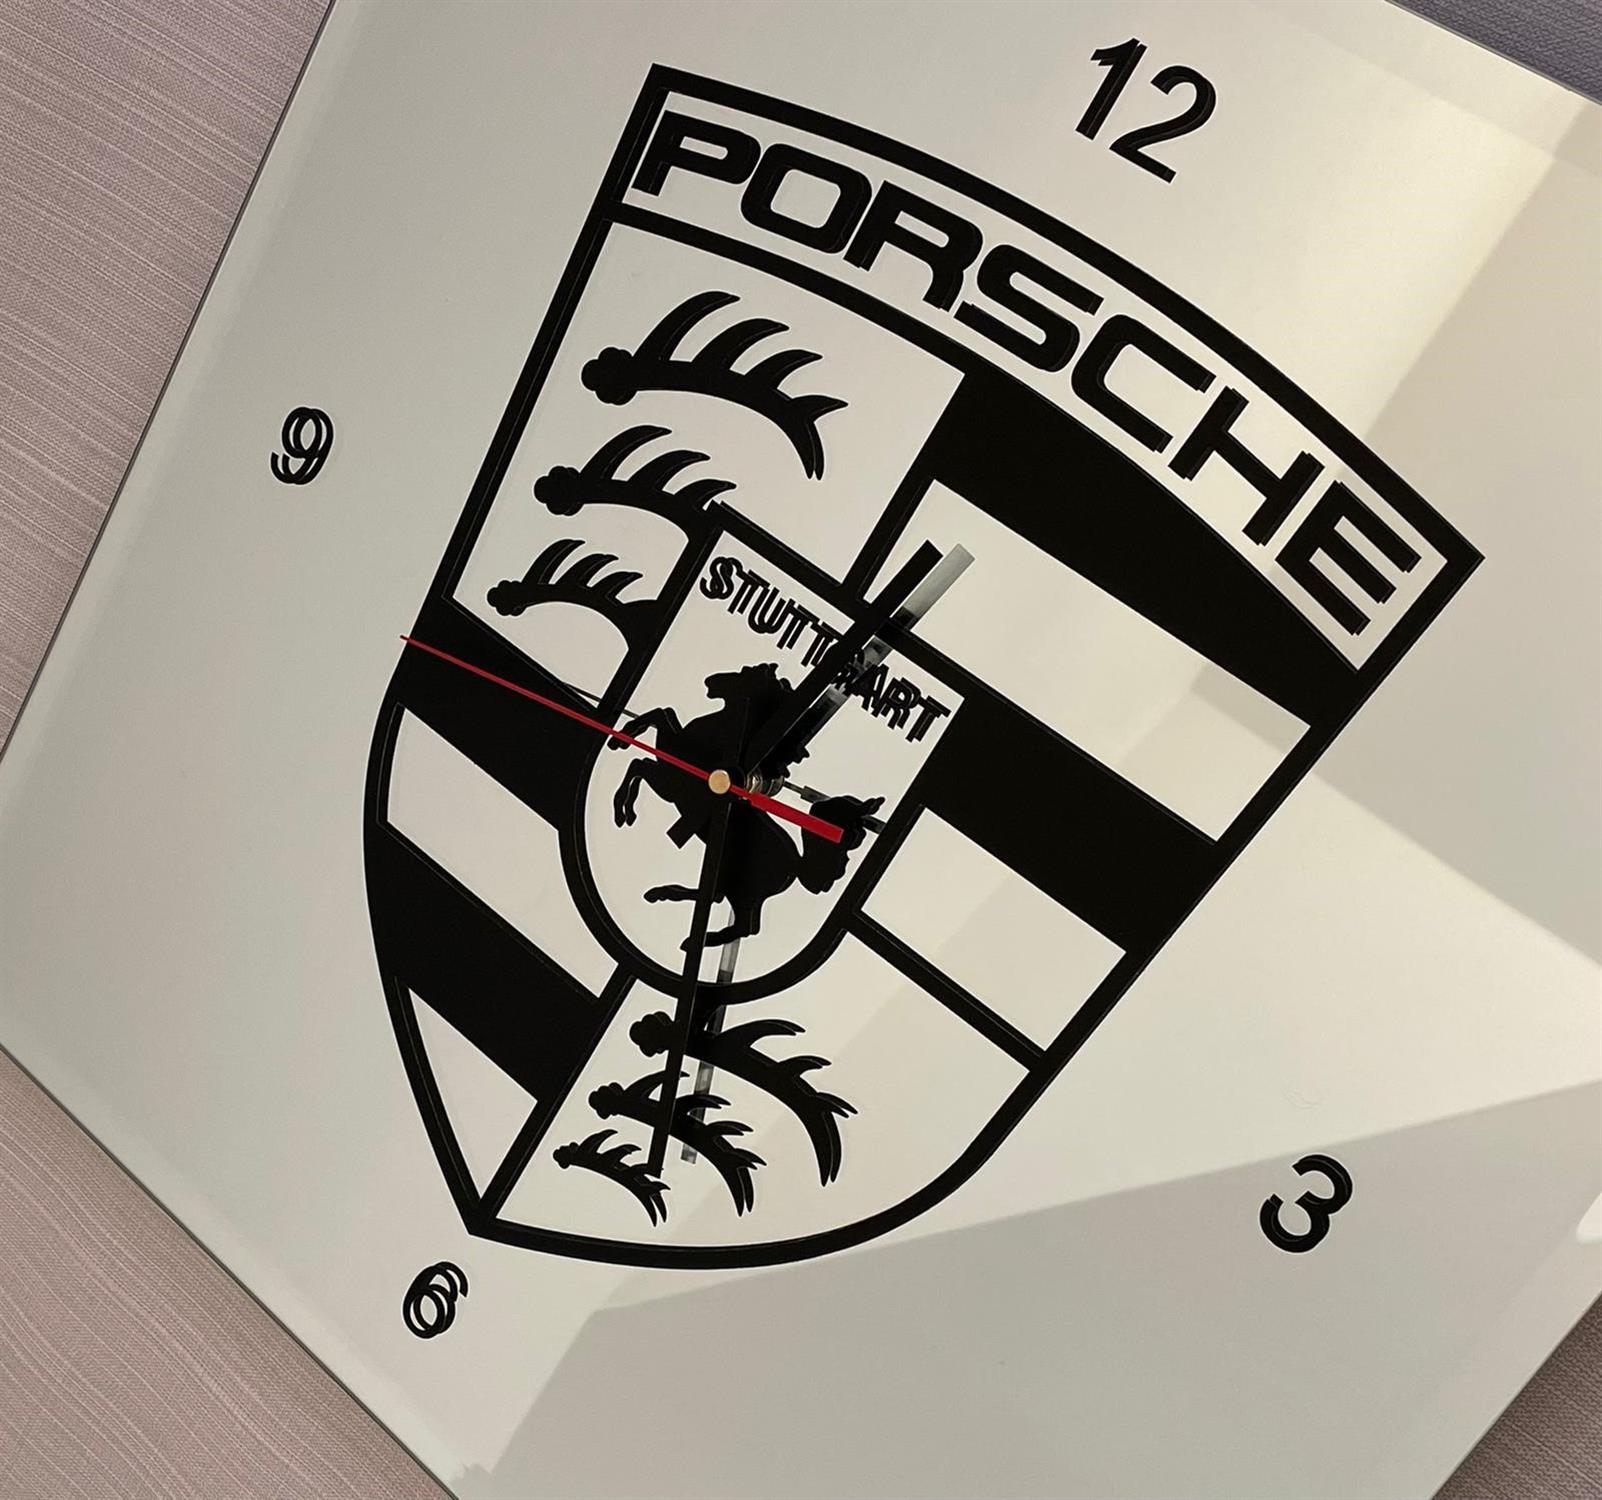 Large Porsche Shield Mirrored Wall Clock - Image 3 of 4